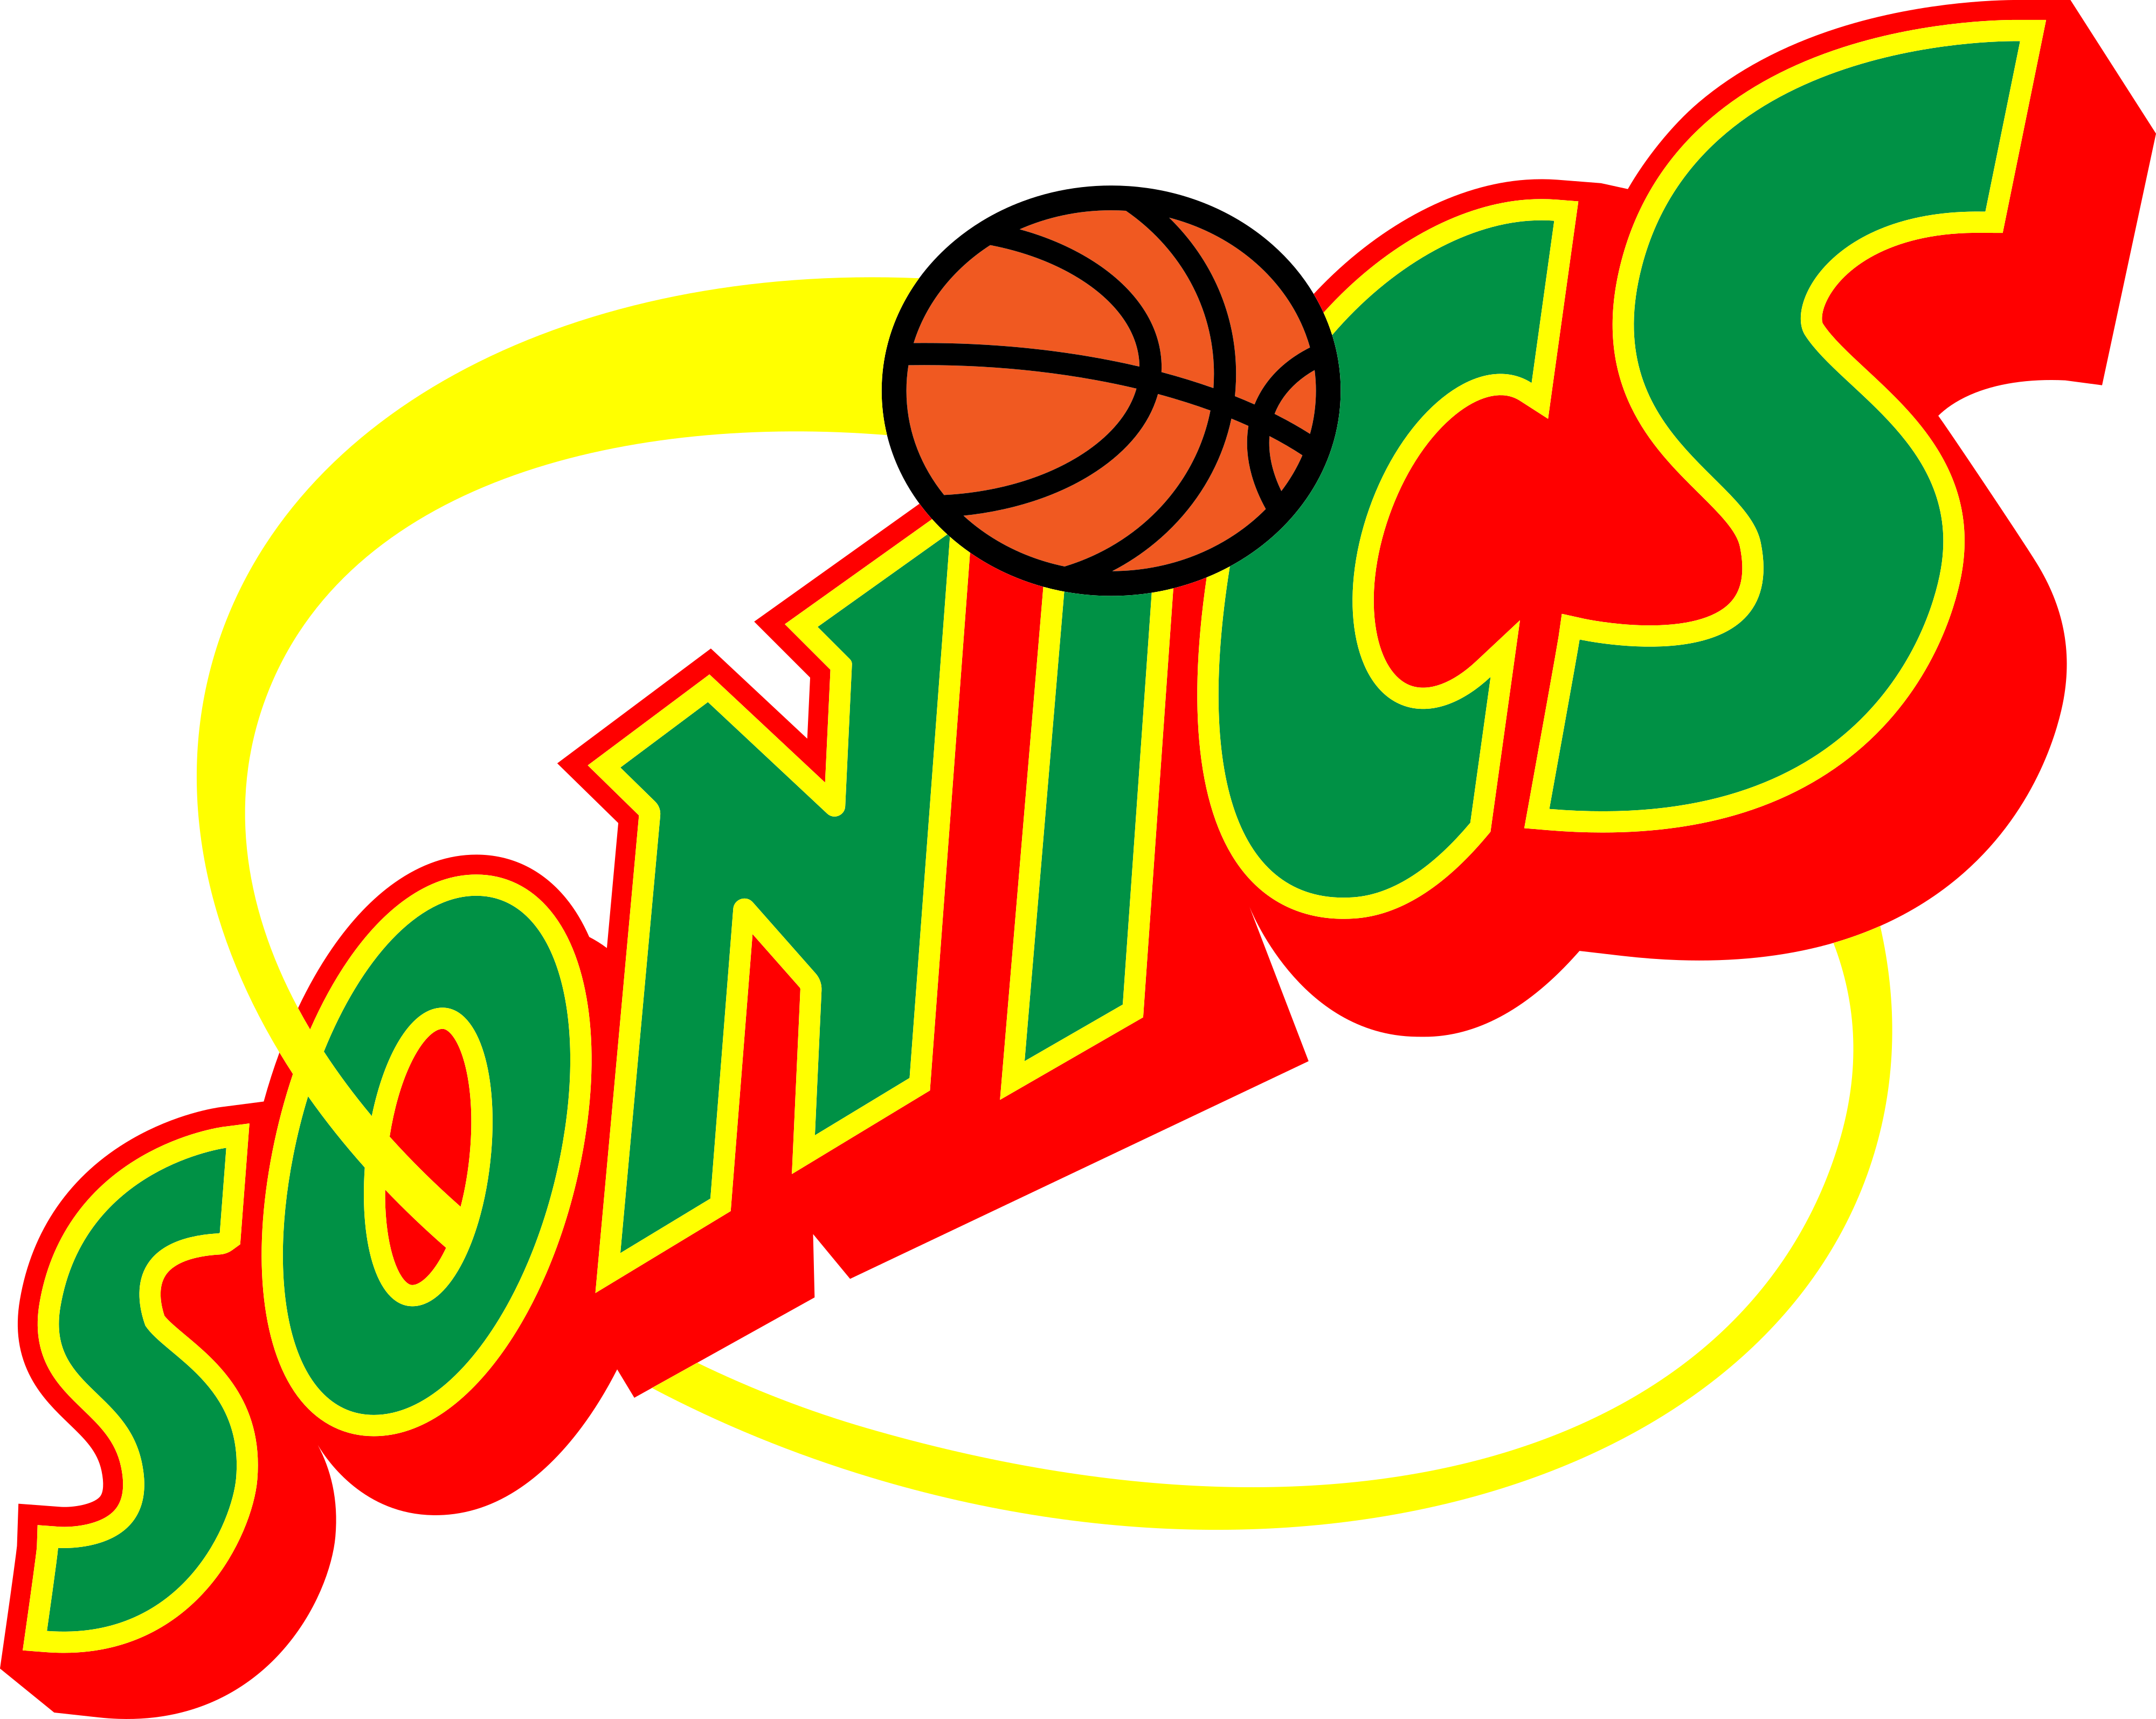 Logotipo Da Seattle Supersonics Png Transparente Stickpng | Images and ...